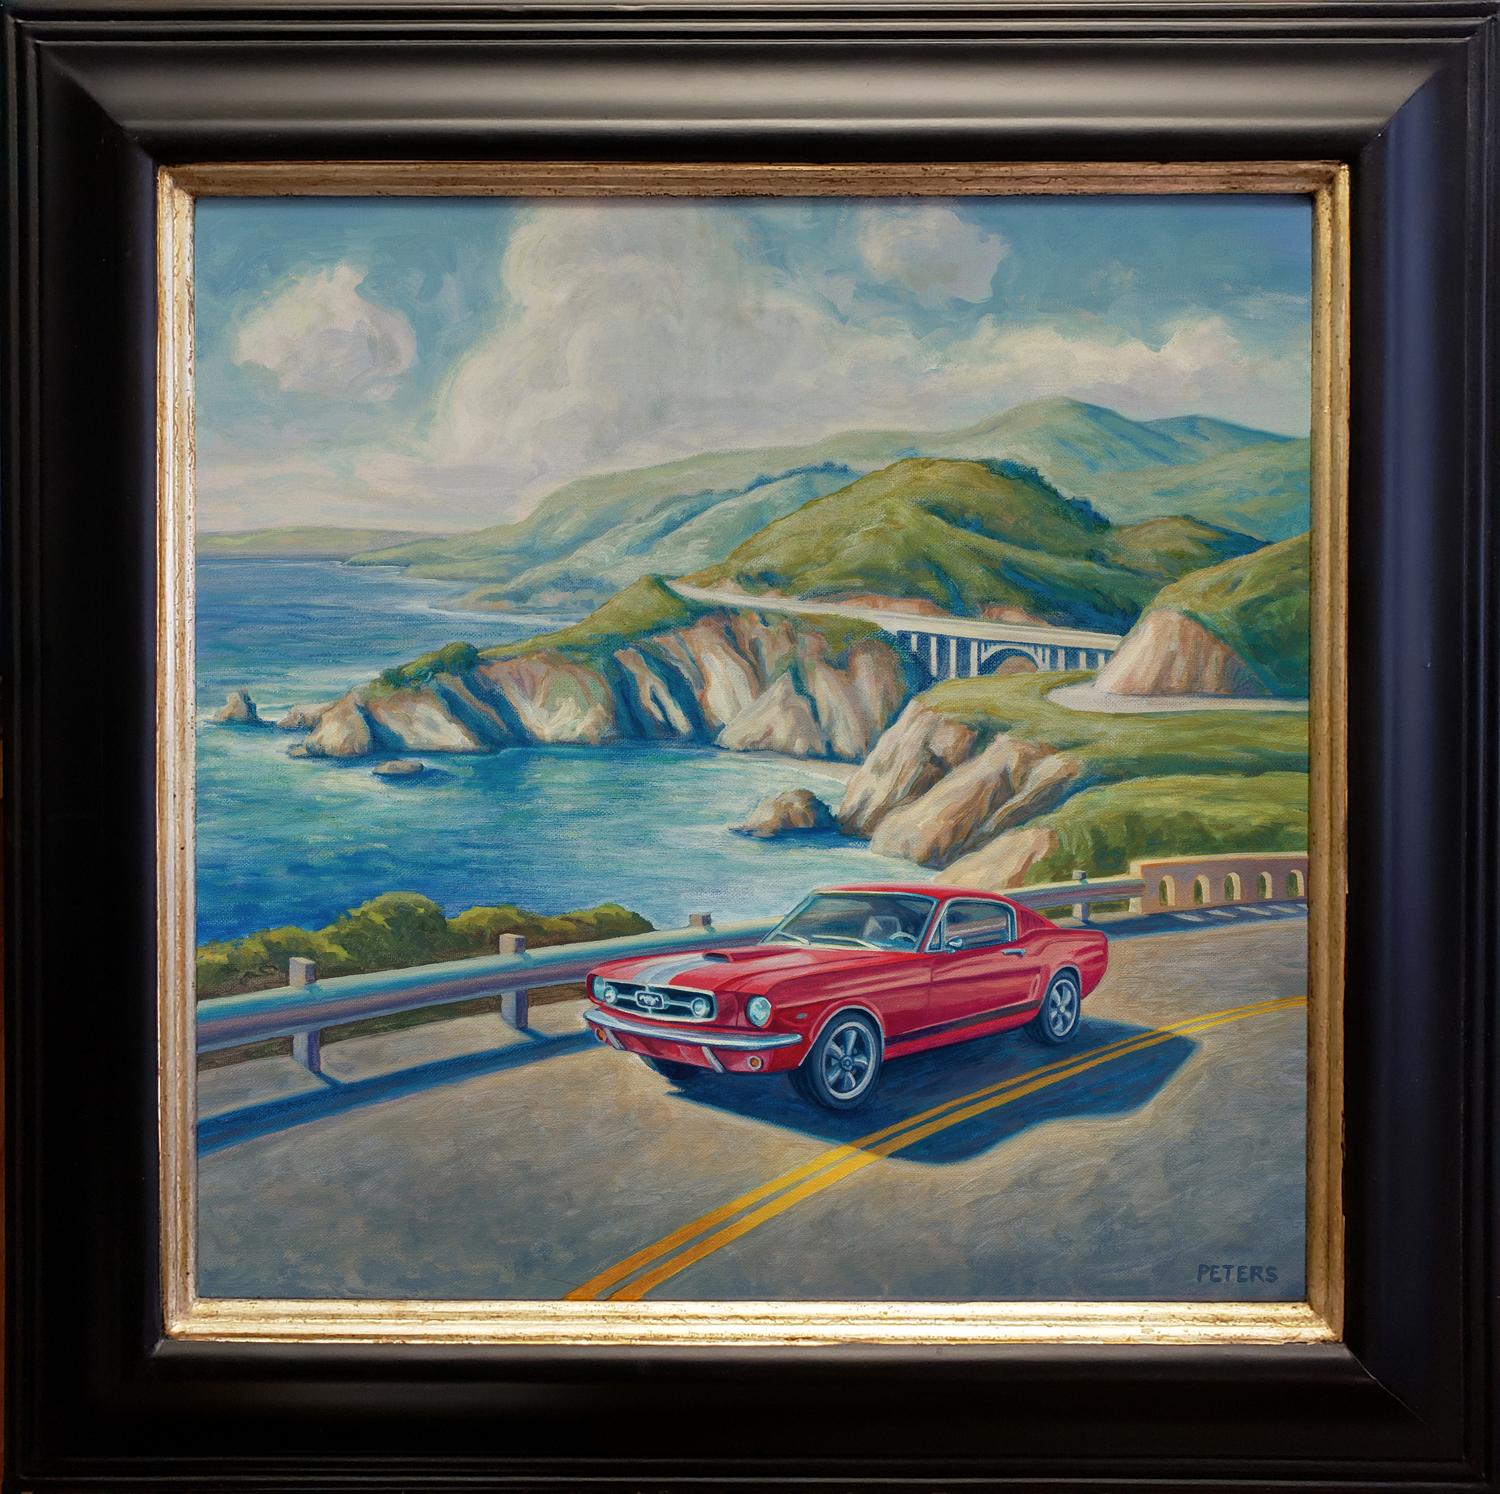 Red Mustang, Bixby Bridge - Painting by Tony Peters